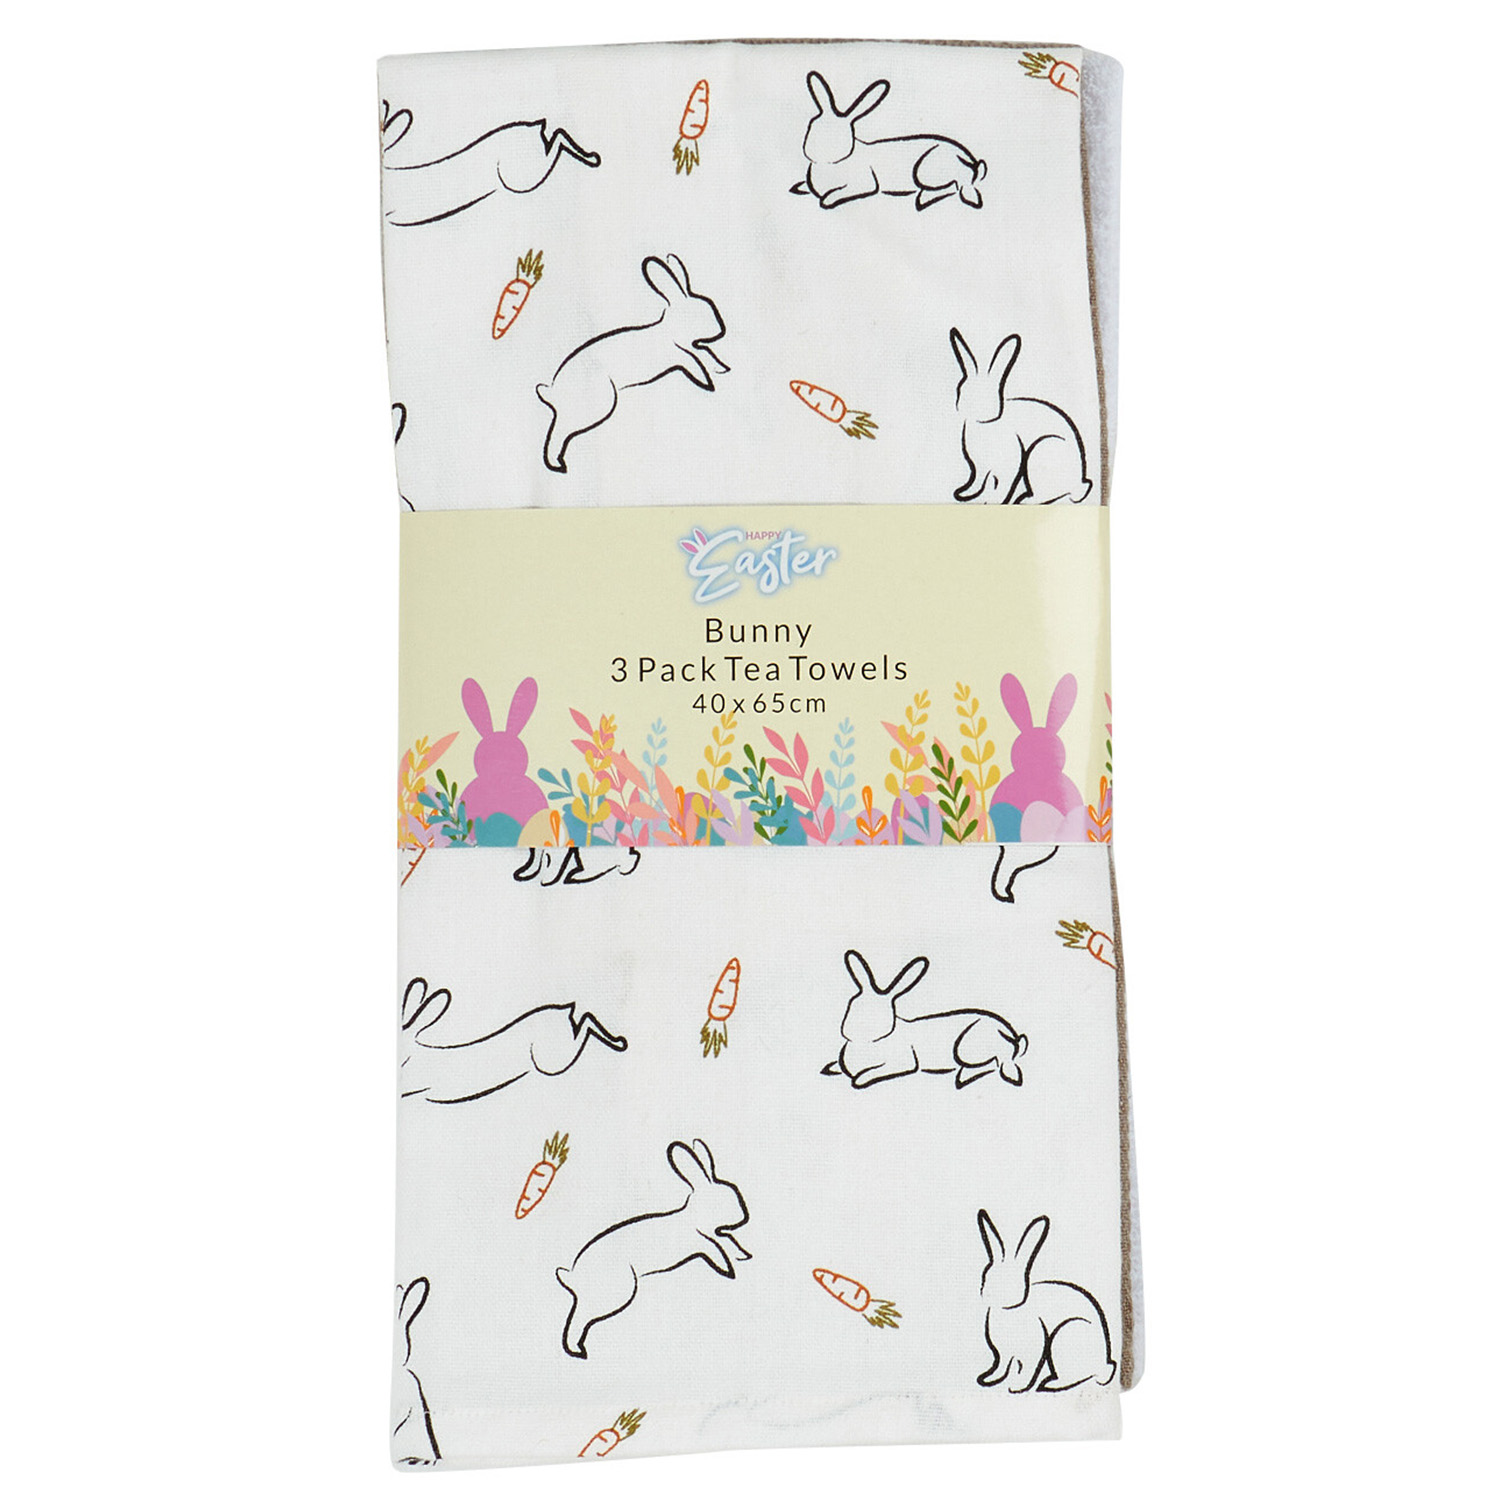 Pack of 3 Bunny Tea Towels - White Image 1